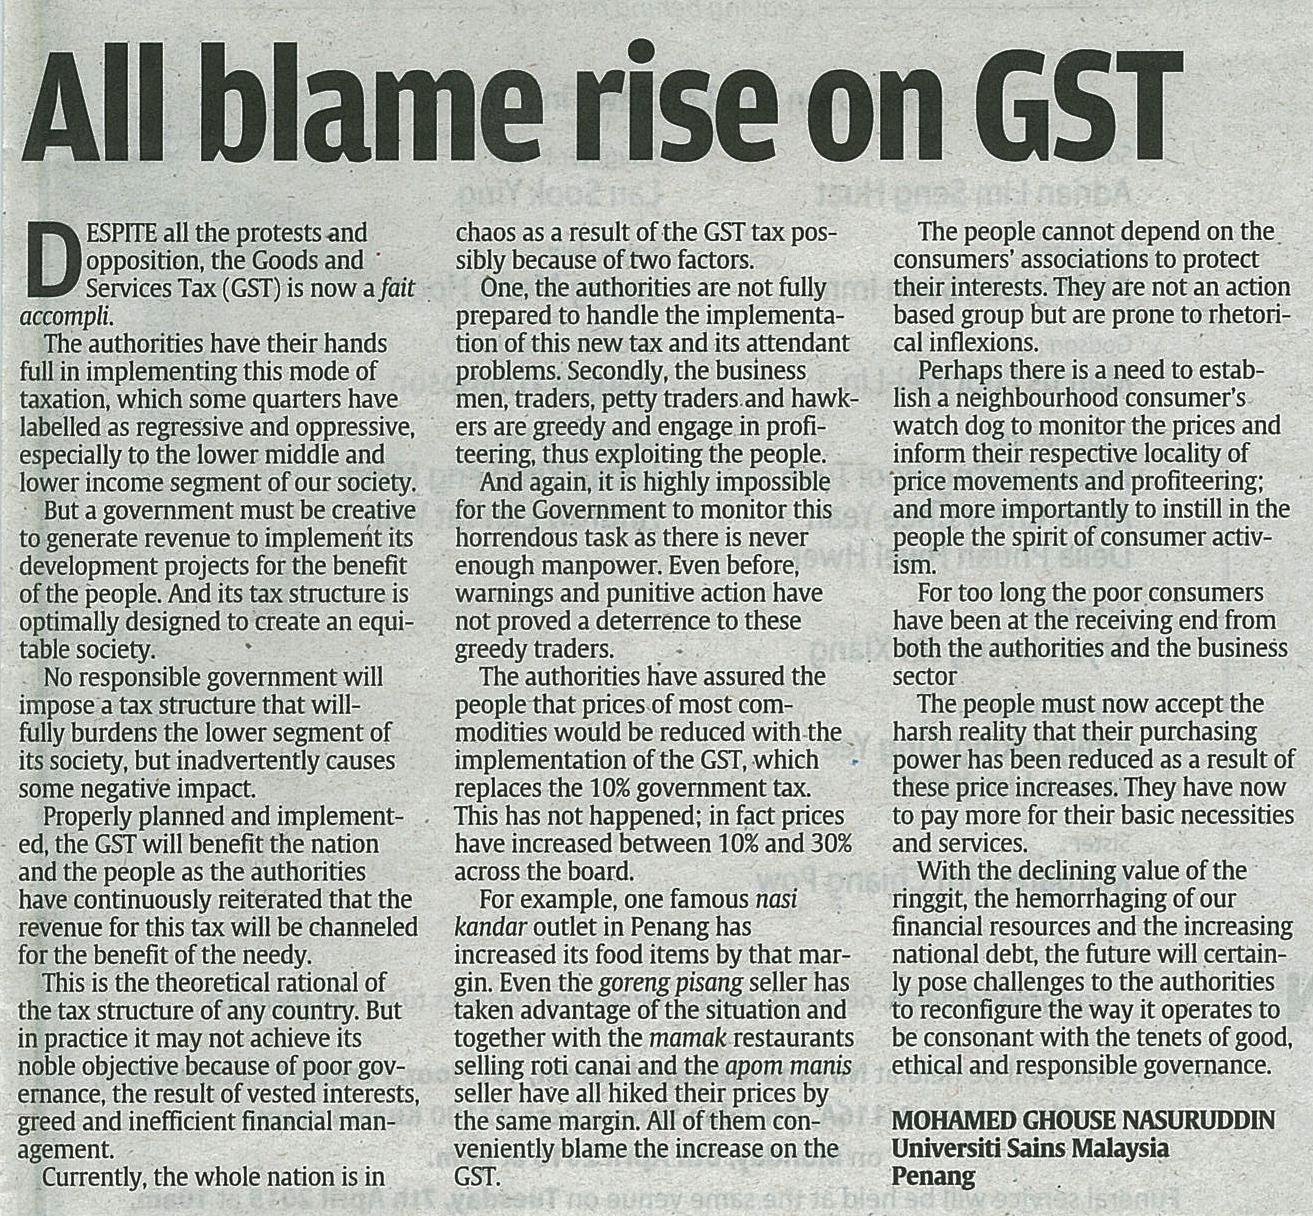 6 April 2015 All blame rise on GST The Star